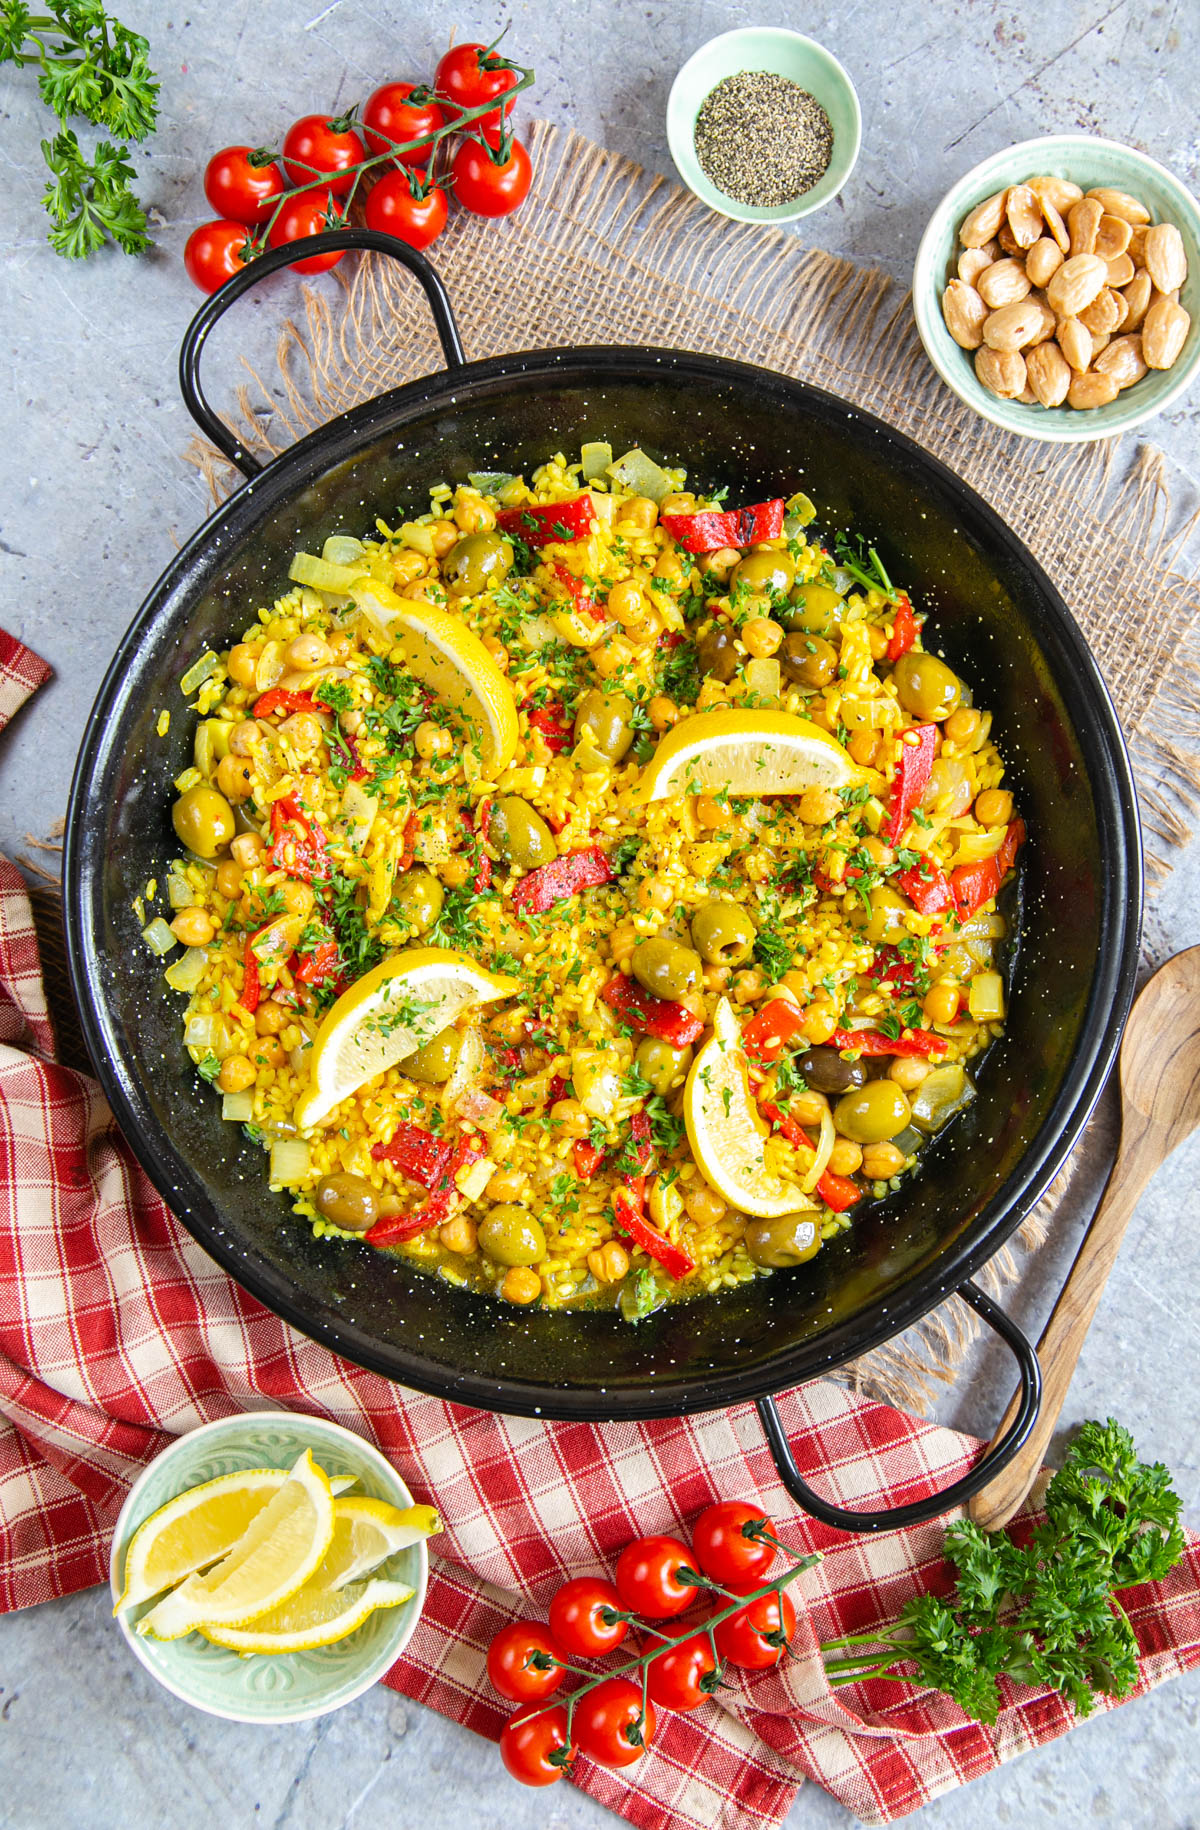 A top down of yellow easy vegetable paella, garnished with parsley and four wedges of lemon. Surrounding the pan are tomatoes on the vine, cloths, a wooden spoon, and dishes of almonds, pepper, and lemon wedges.